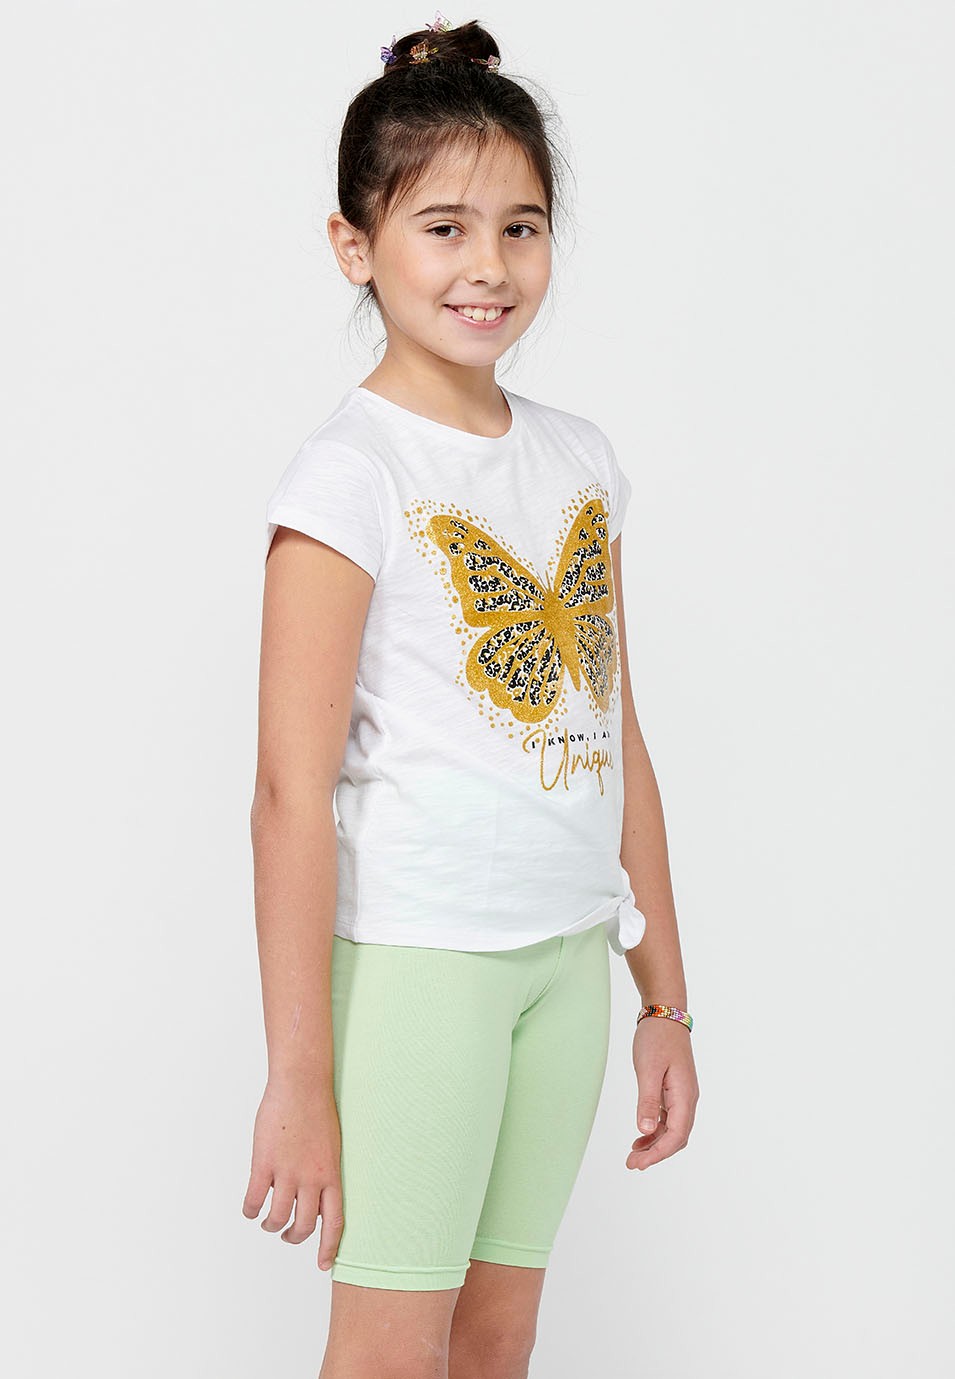 Short-sleeved T-shirt Round Neck Cotton Top with Front Print and White Front Detail for Girls 5